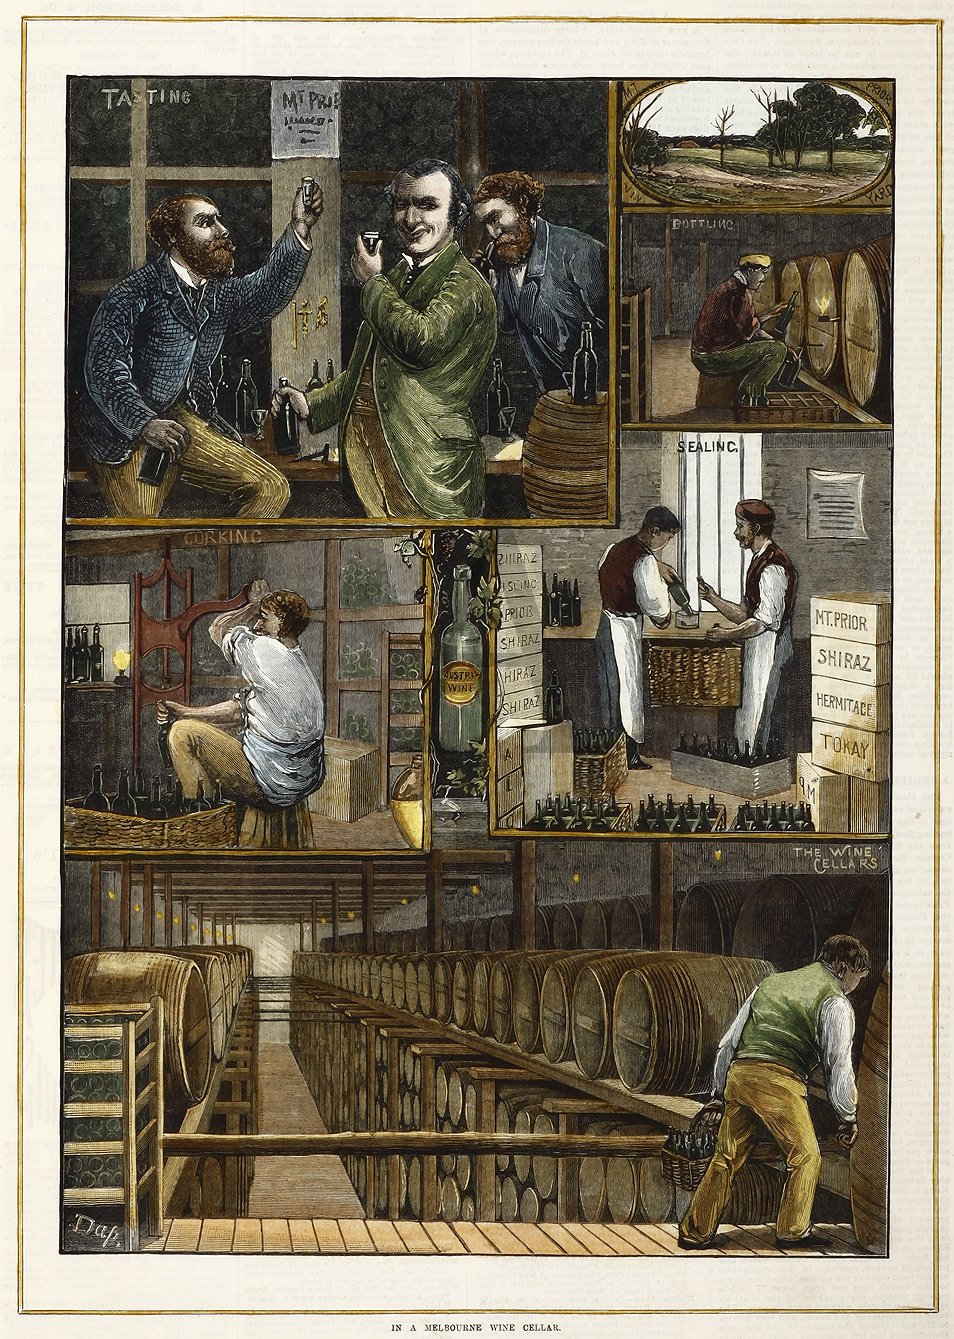 In a Melbourne Wine Cellar - Antique Print from 1882